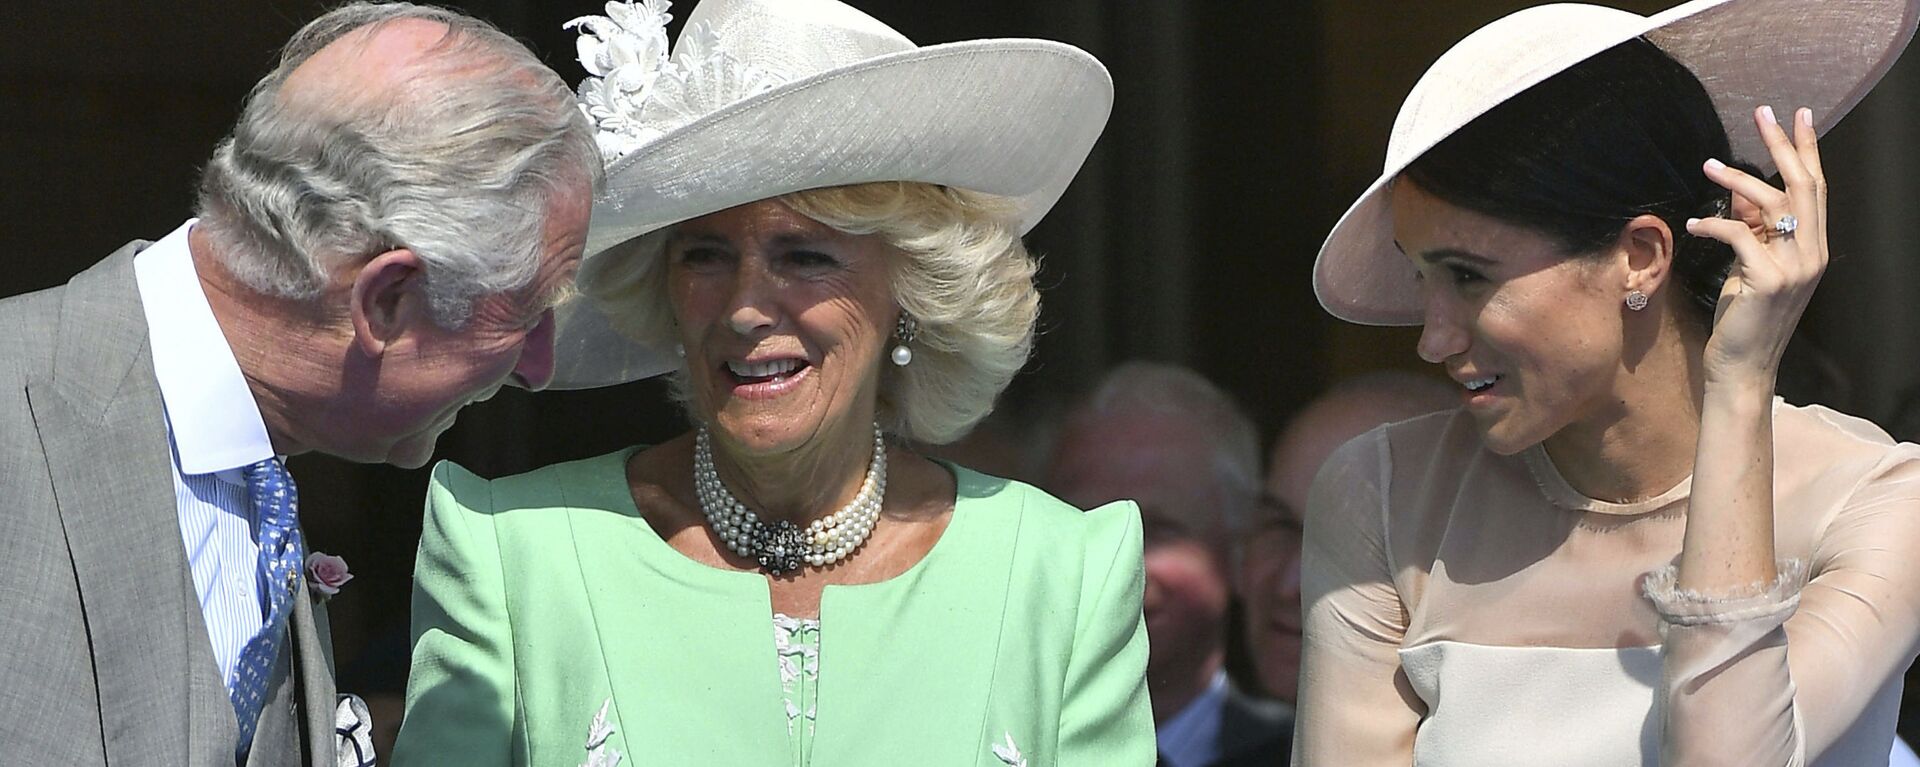 Britian's Prince Charles, left, reacts with Camilla, the Duchess of Cornwall and Meghan, the Duchess of Sussex, during a garden party at Buckingham Palace in London, Tuesday May 22, 2018. - Sputnik International, 1920, 06.02.2022